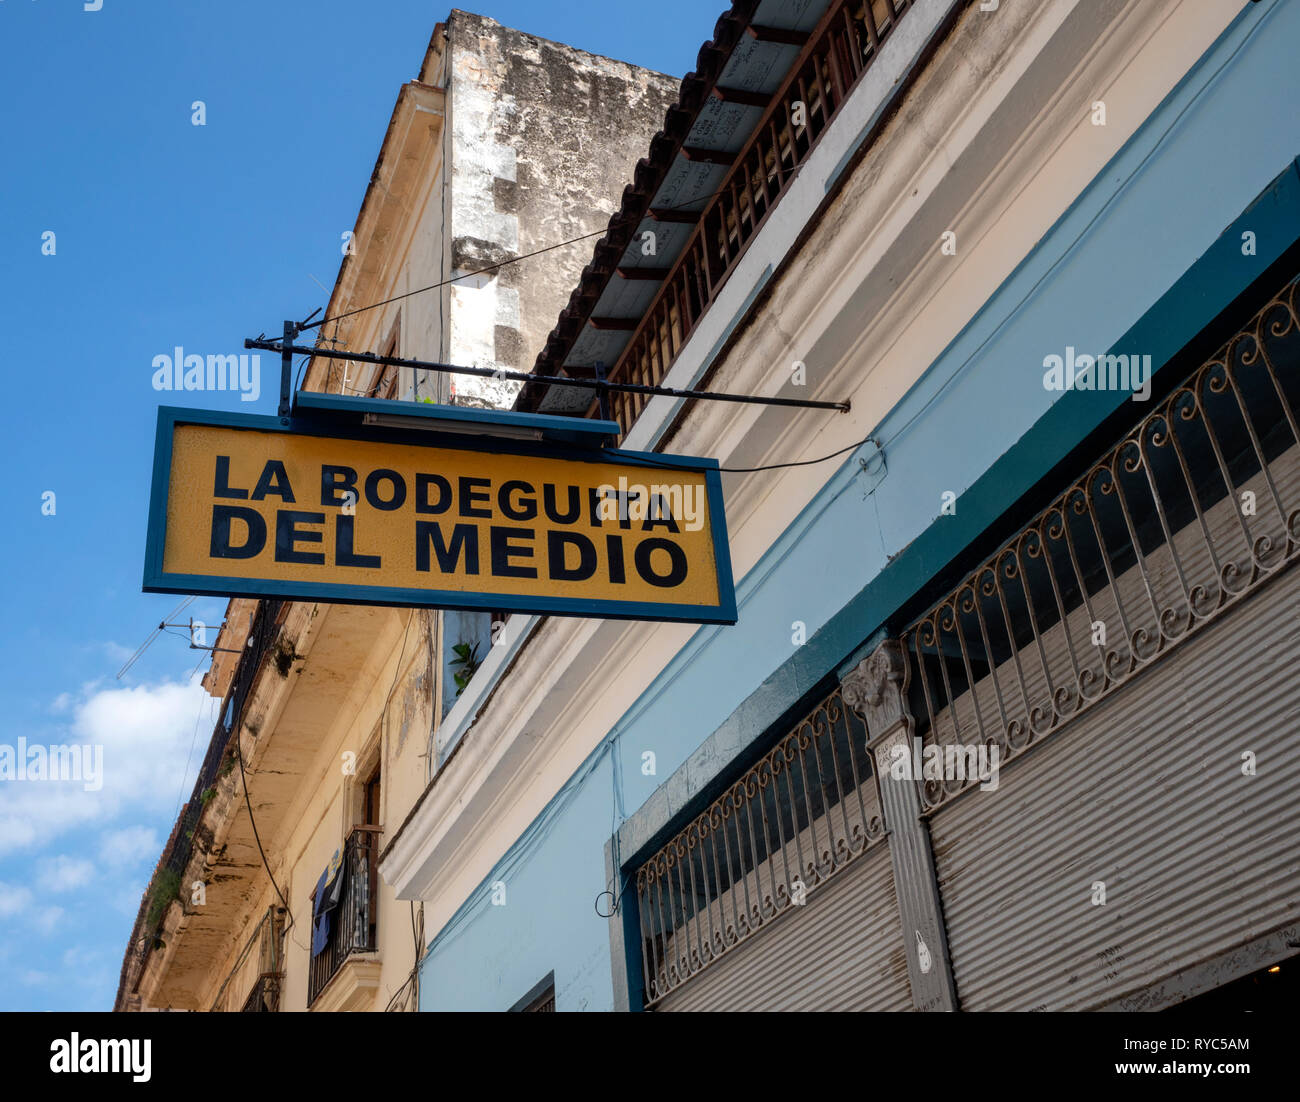 La Bodeguita del Medio, bar in Havana, Cuba, haunt of celebrities such as Earnest Hemingway. It claims to be the birthplace of the mojito. Stock Photo